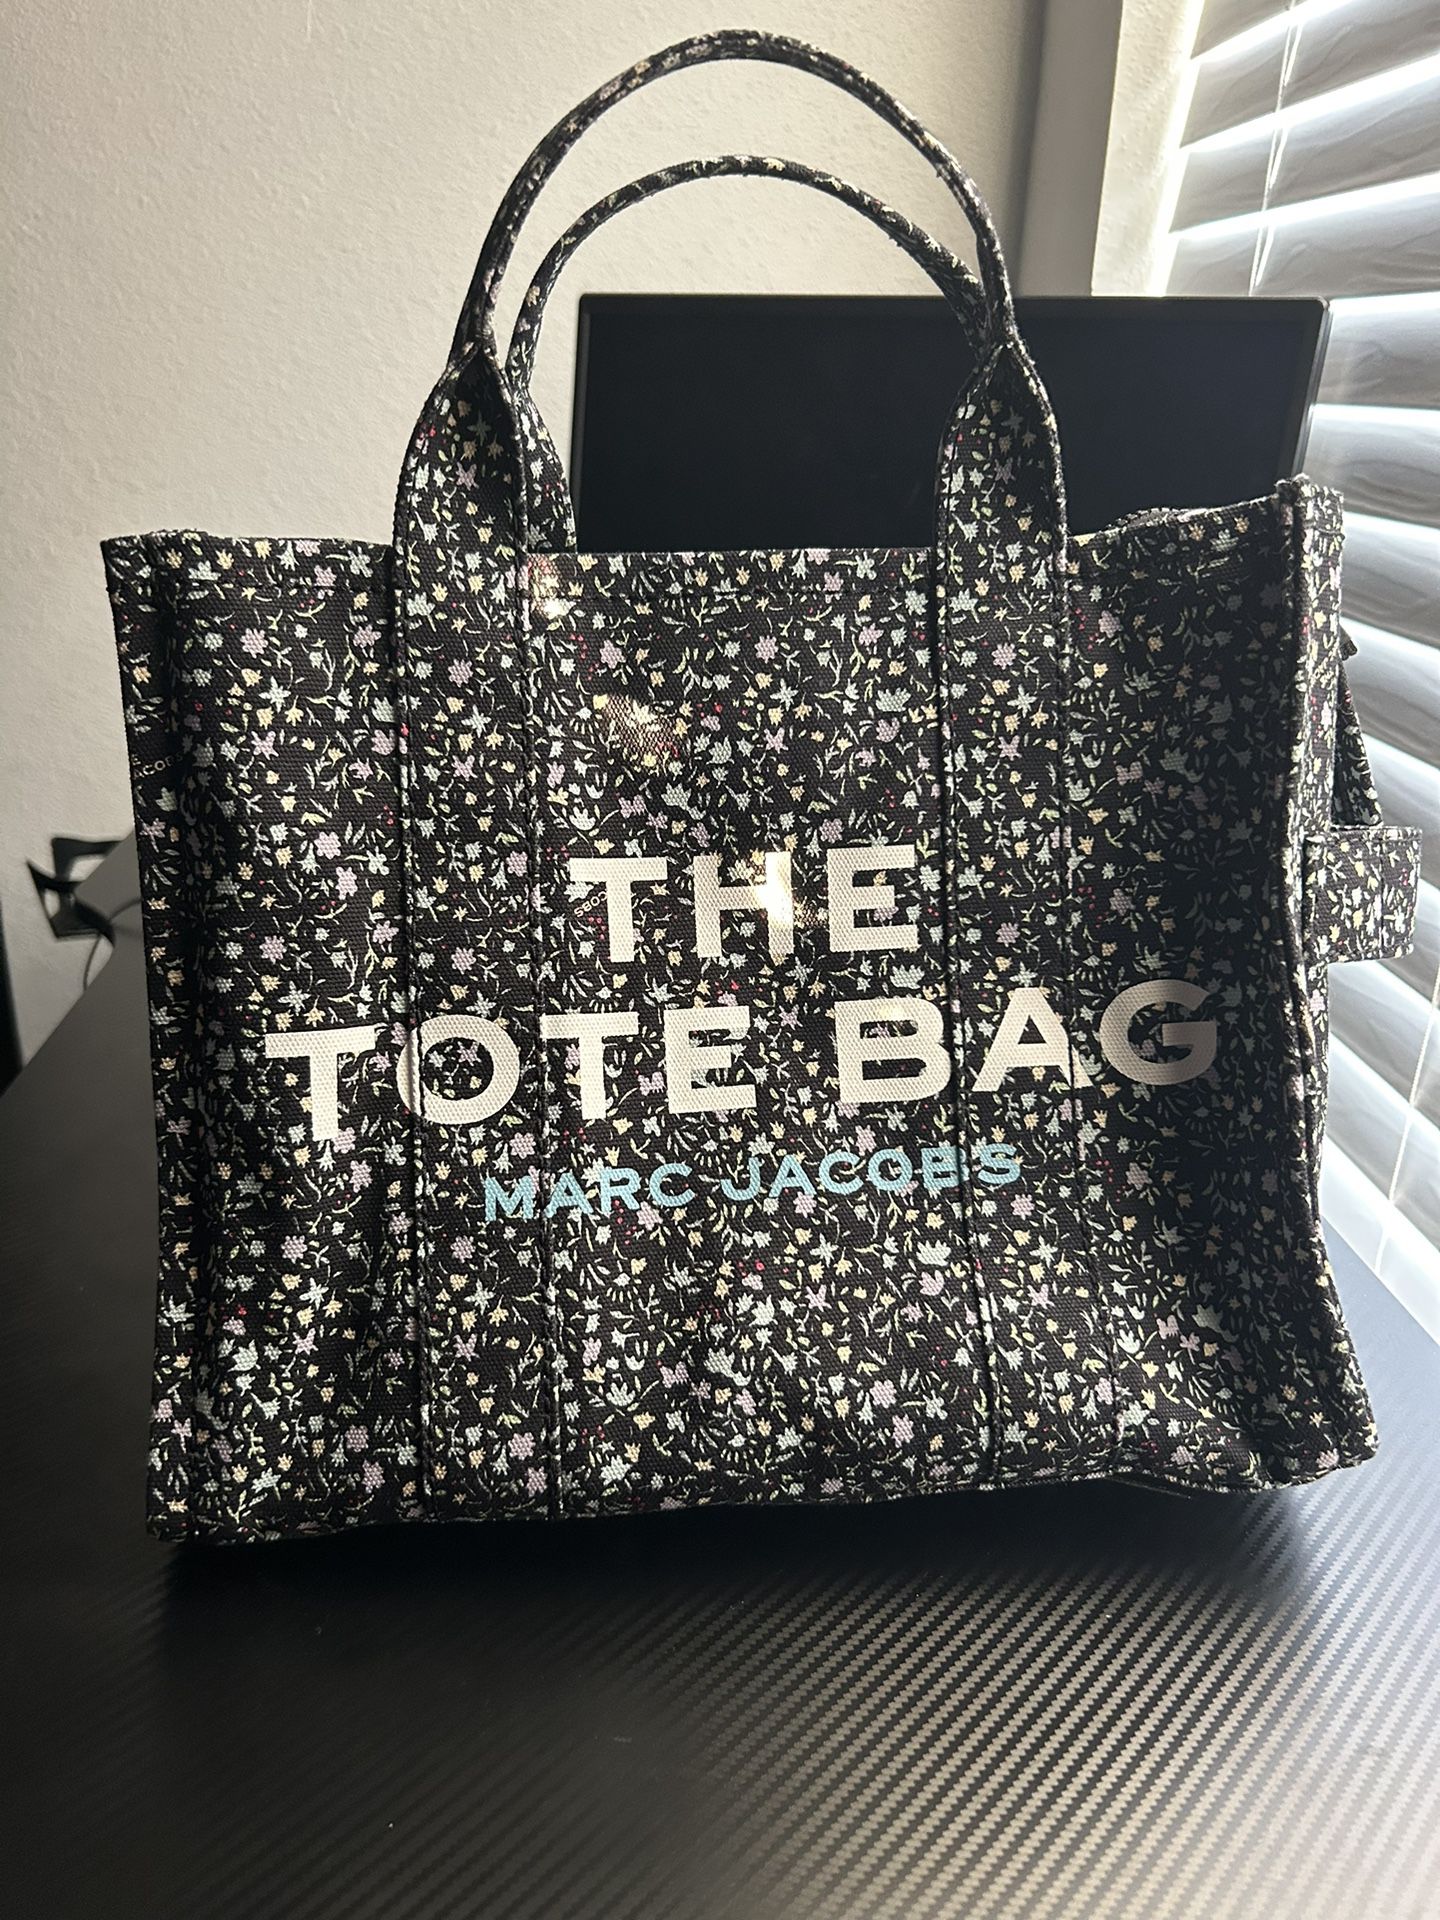 Tote Bag (Marc Jacobs) Comes With Straps